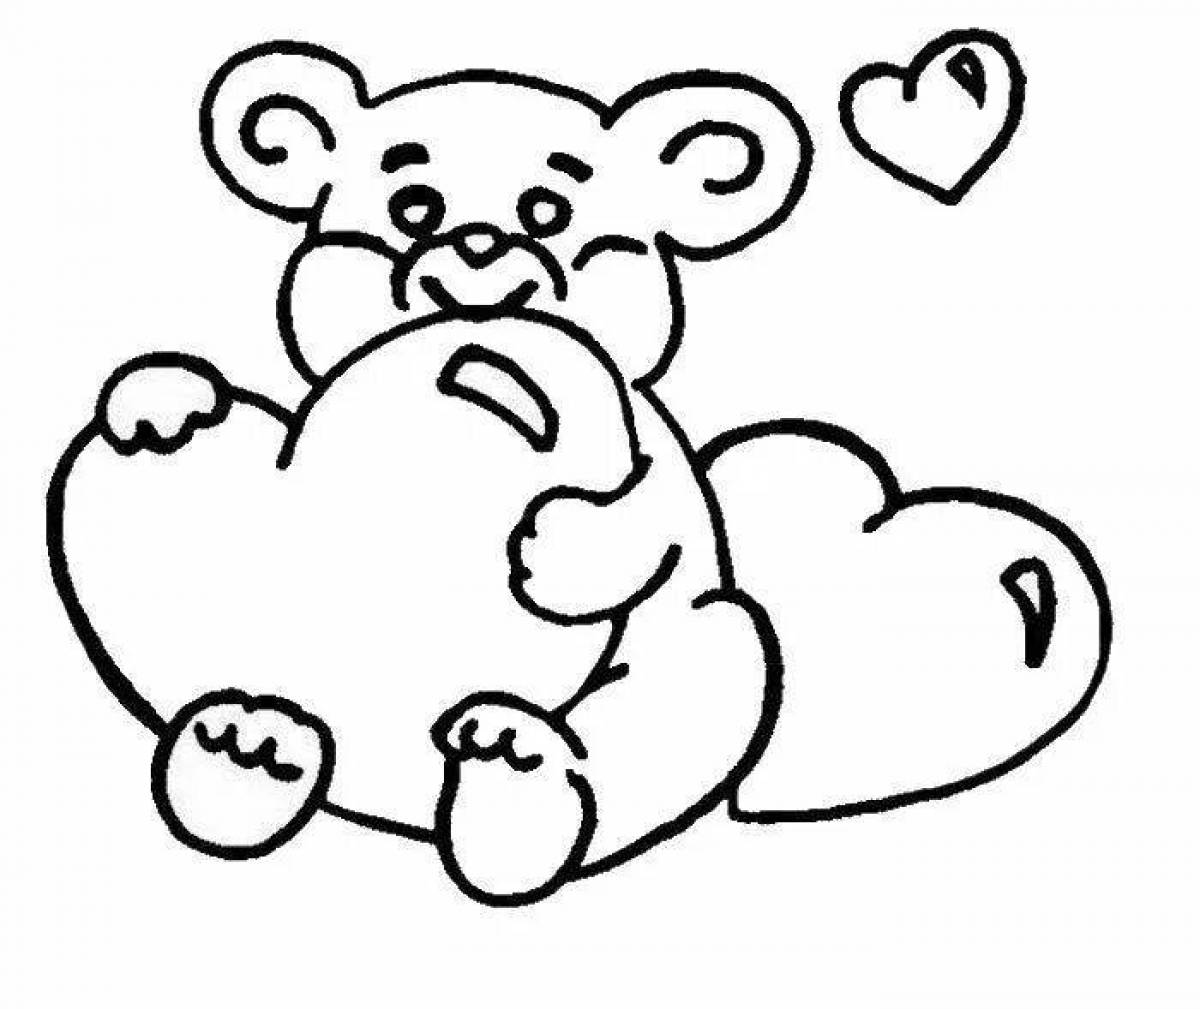 Live teddy bear with a heart coloring book